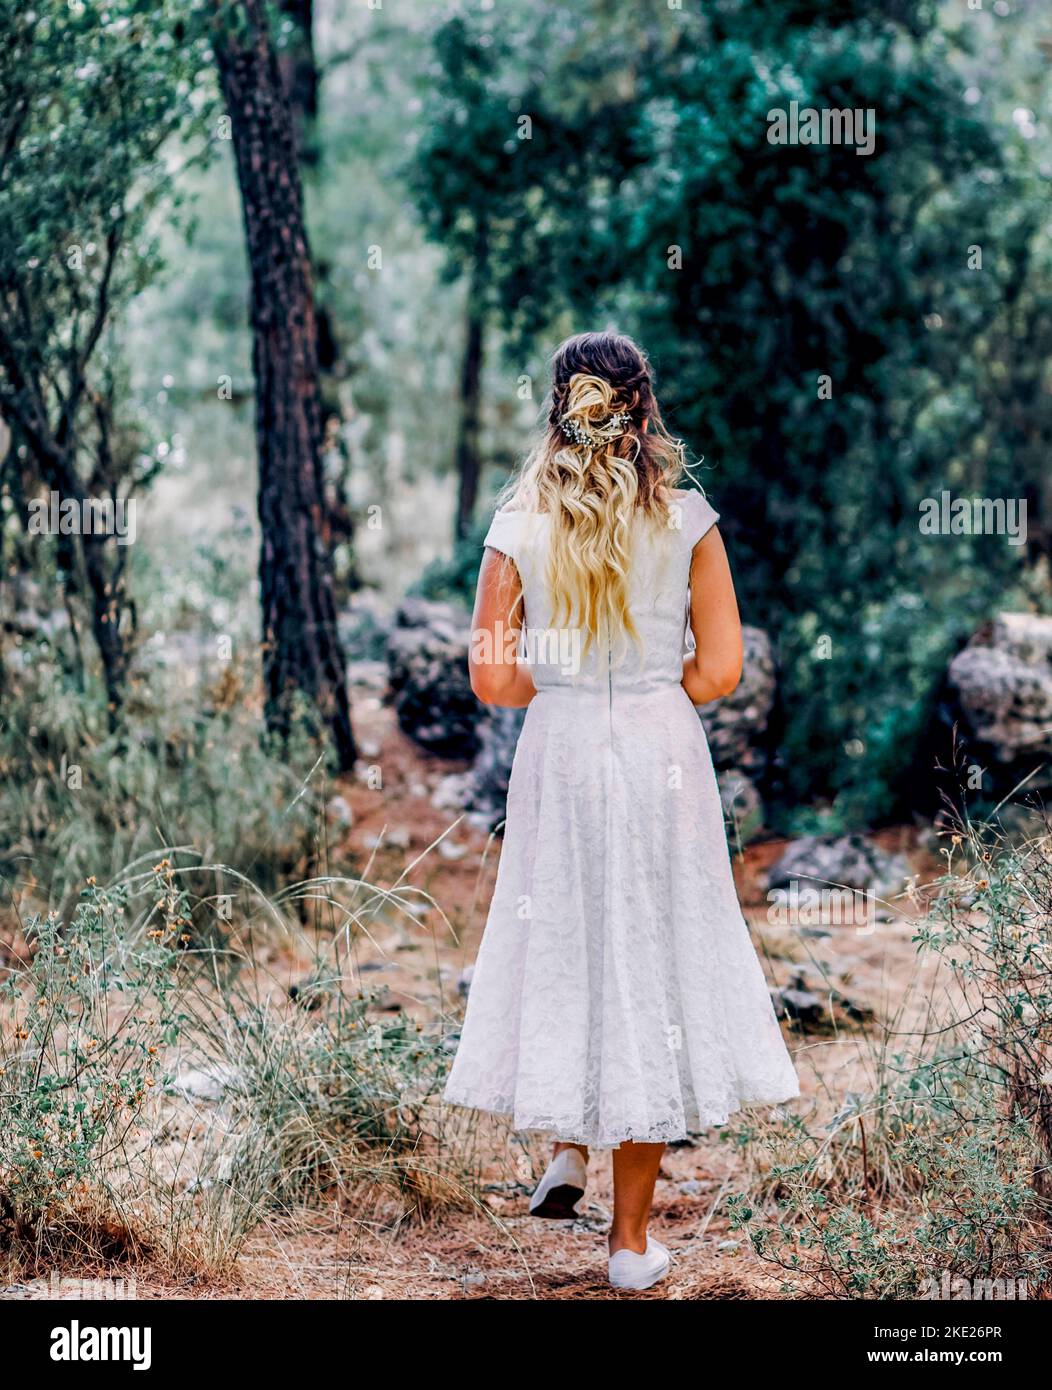 bride in white dress walking alone in the Forest Stock Photo